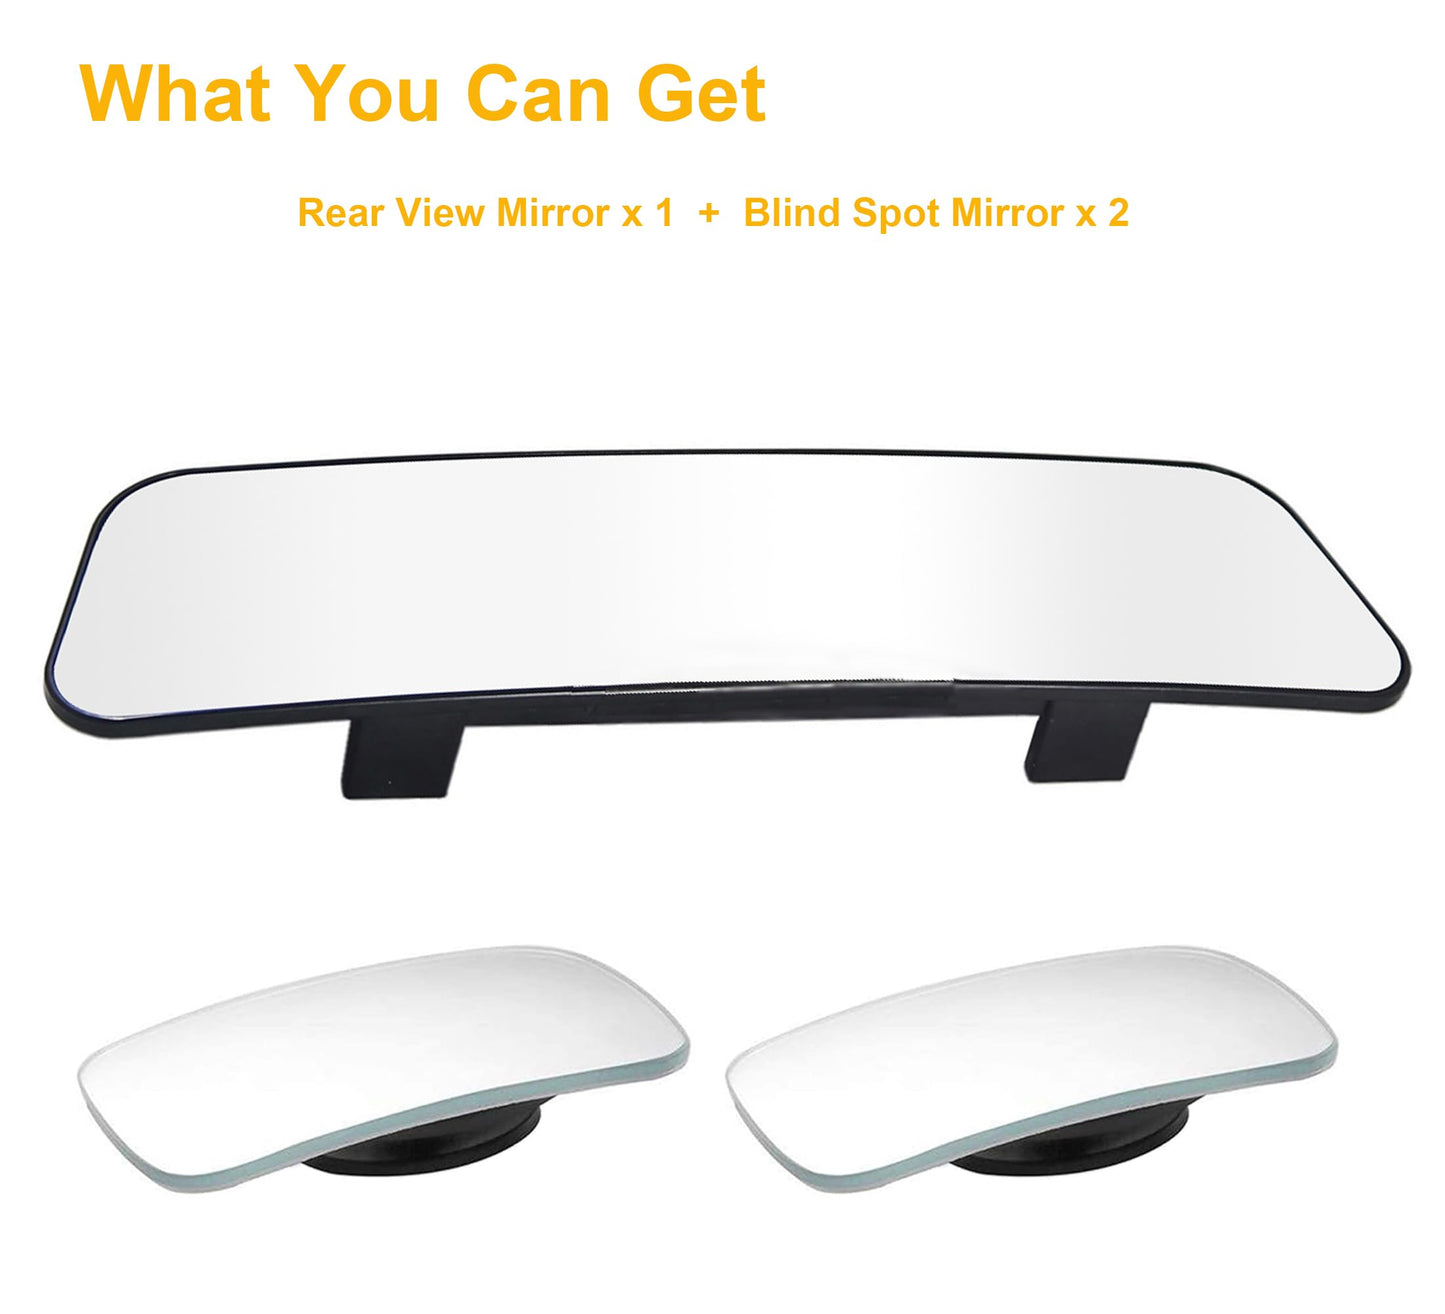 Rear View Mirror, Panoramic Rearview Mirror, Car Interior Clip-On Wide Angle Rear View Mirror to Reduce Blind Spot Effectively for Car SUV Trucks – Convex - (2 Pack Blind Spot Mirror - Square)